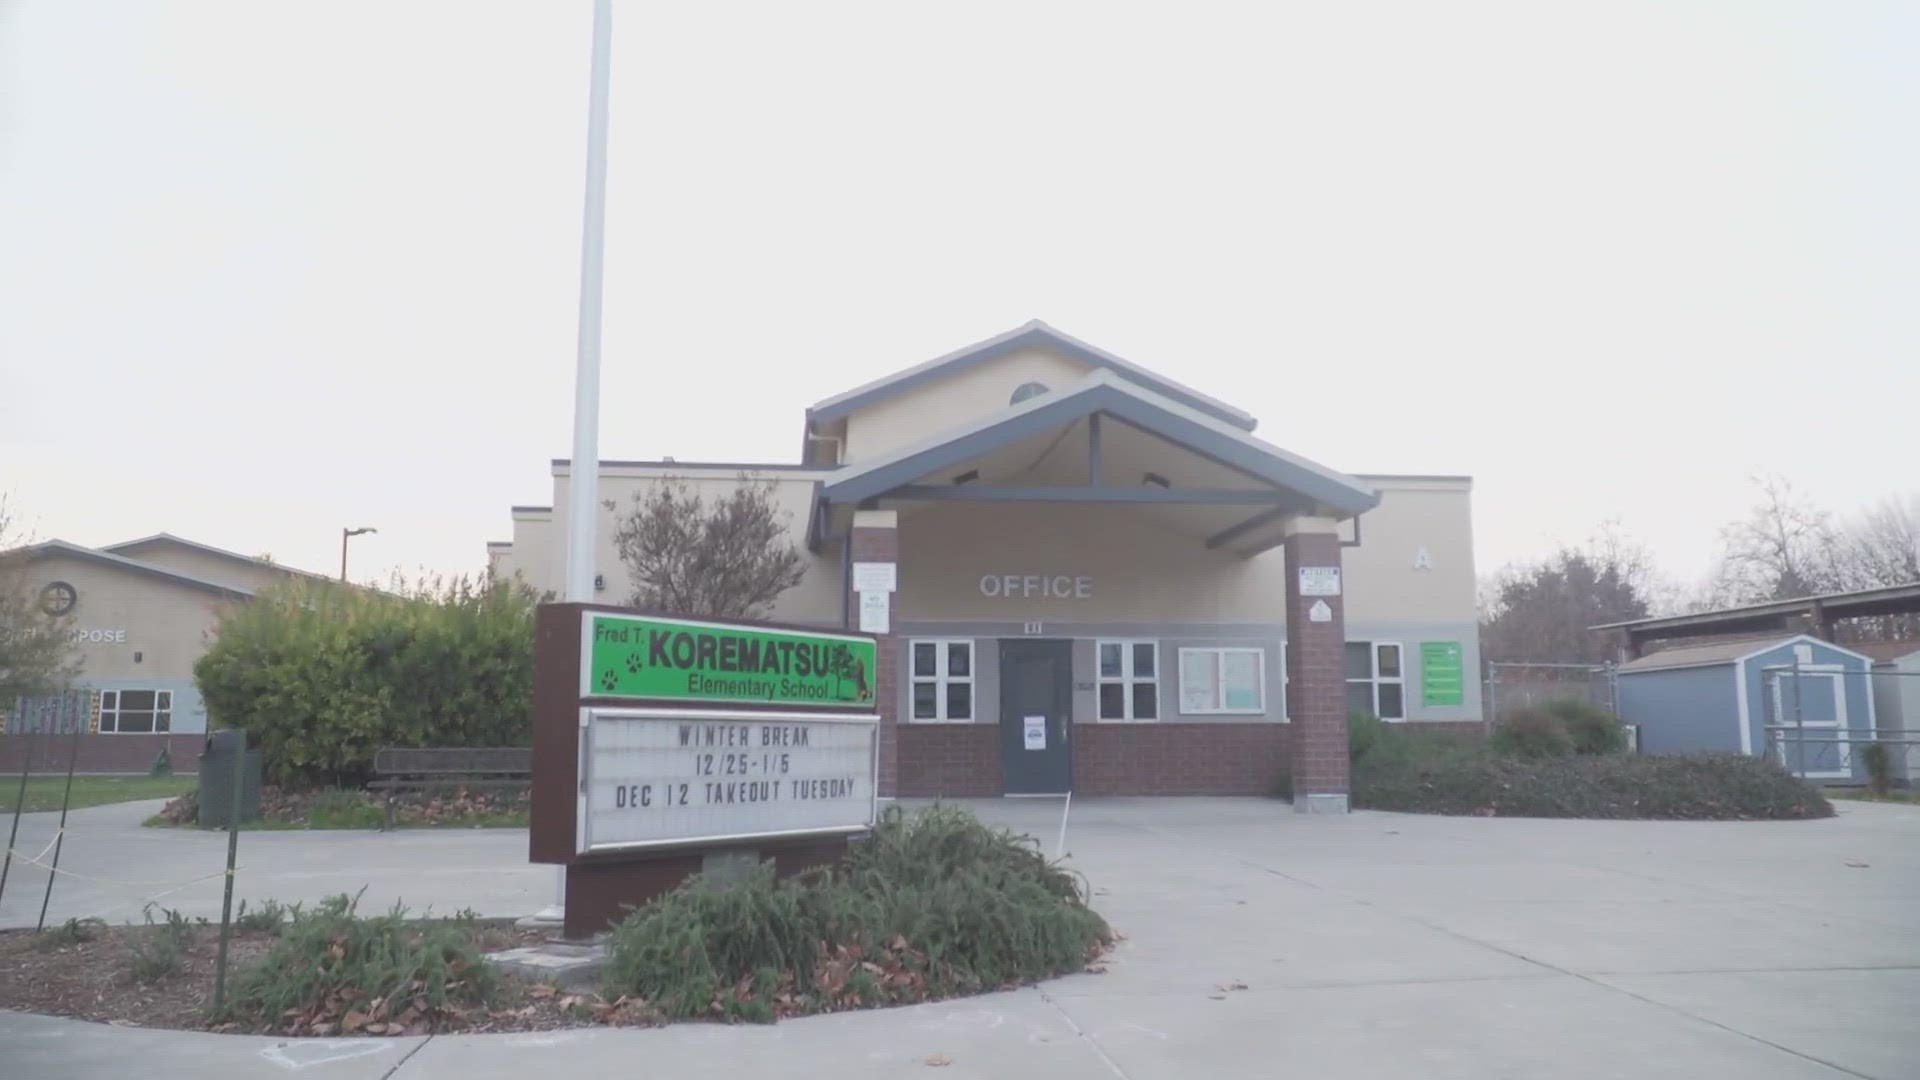 A staff member found the N-word on an exterior wall of an elementary school in Davis.